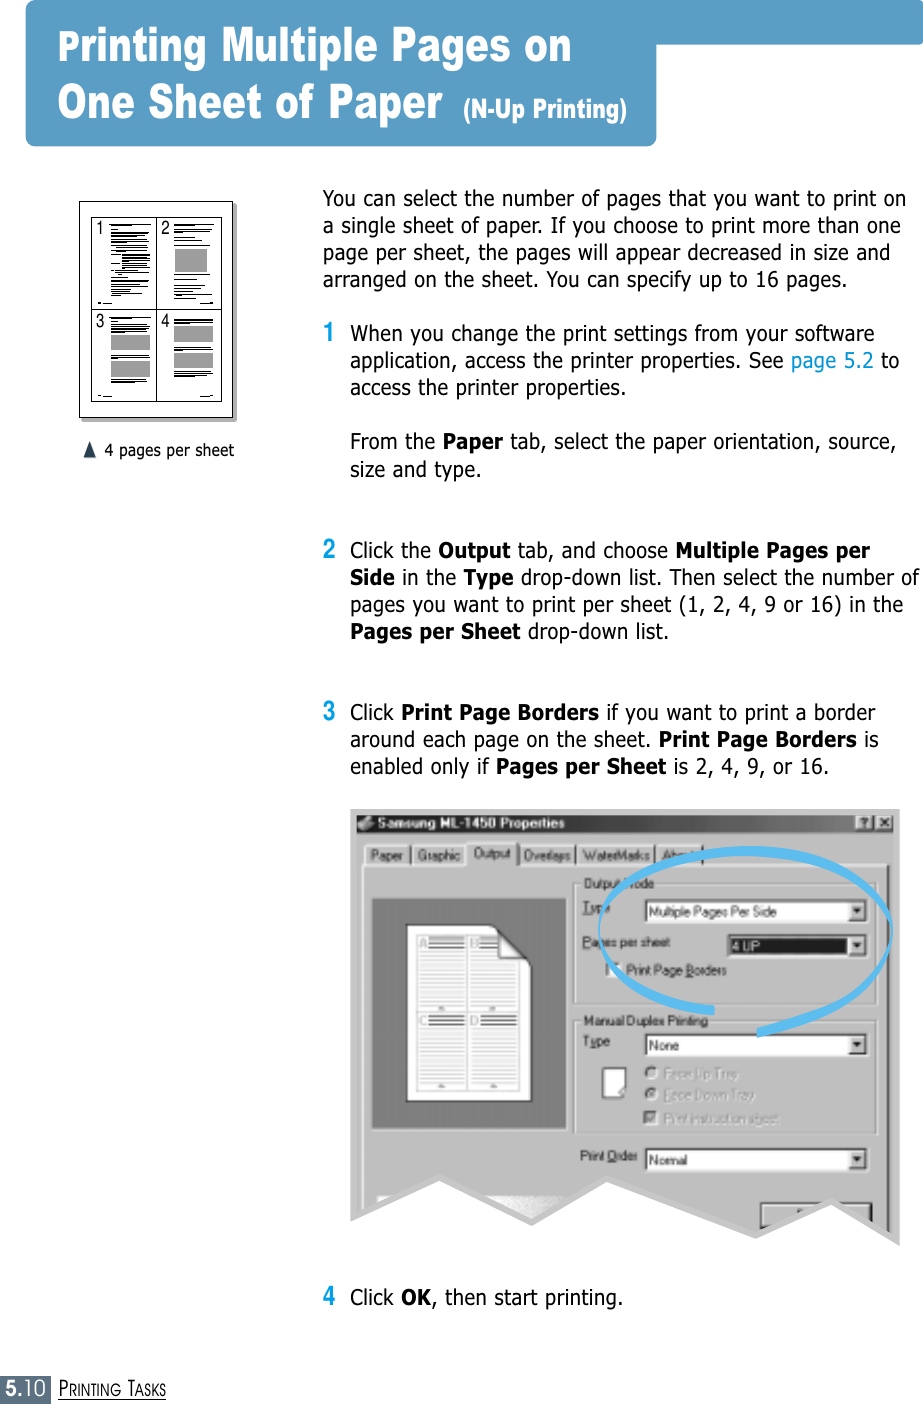 5.10PRINTING TASKS1 23 4You can select the number of pages that you want to print ona single sheet of paper. If you choose to print more than onepage per sheet, the pages will appear decreased in size andarranged on the sheet. You can specify up to 16 pages.1When you change the print settings from your softwareapplication, access the printer properties. See page 5.2 toaccess the printer properties.From the Paper tab, select the paper orientation, source,size and type.2Click the Output tab, and choose Multiple Pages perSide in the Type drop-down list. Then select the number ofpages you want to print per sheet (1, 2, 4, 9 or 16) in thePages per Sheet drop-down list.3Click Print Page Borders if you want to print a borderaround each page on the sheet. Print Page Borders isenabled only if Pages per Sheet is 2, 4, 9, or 16.➐☎➐☎4 pages per sheetPrinting Multiple Pages on One Sheet of Paper  (N-Up Printing)4Click OK, then start printing. 